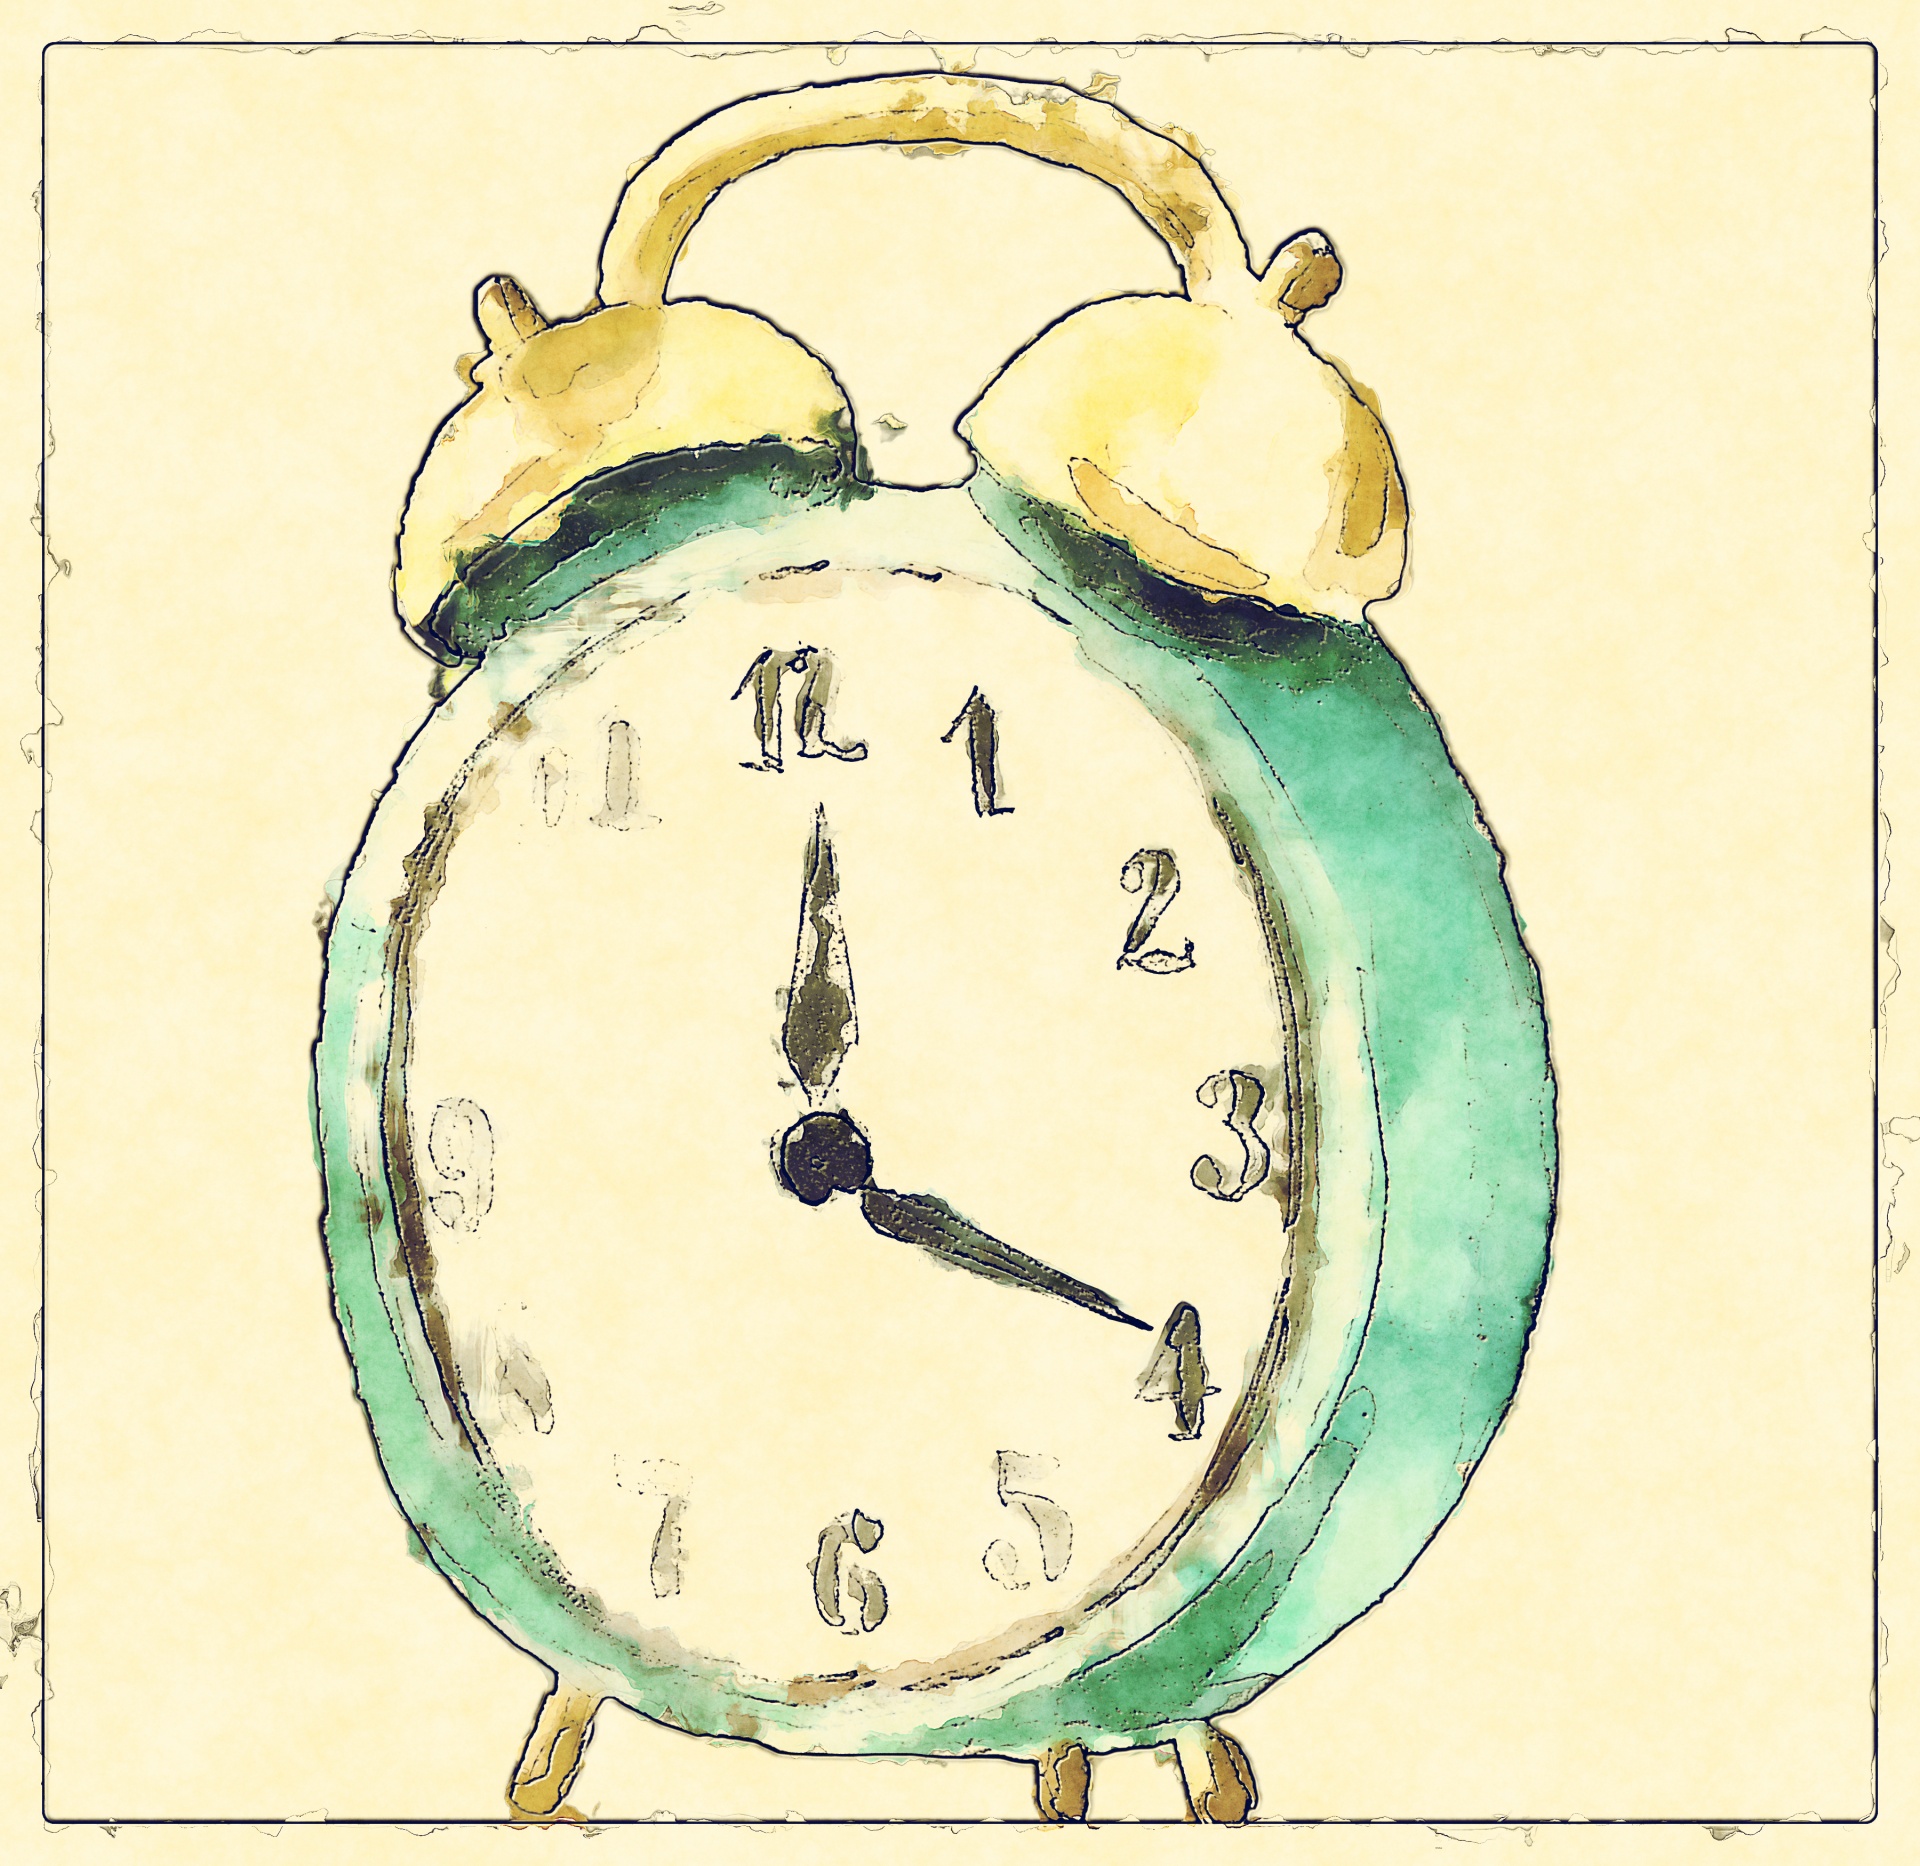 watercolor illustration of an old wind up alarm clock will bells as the sounding alarm